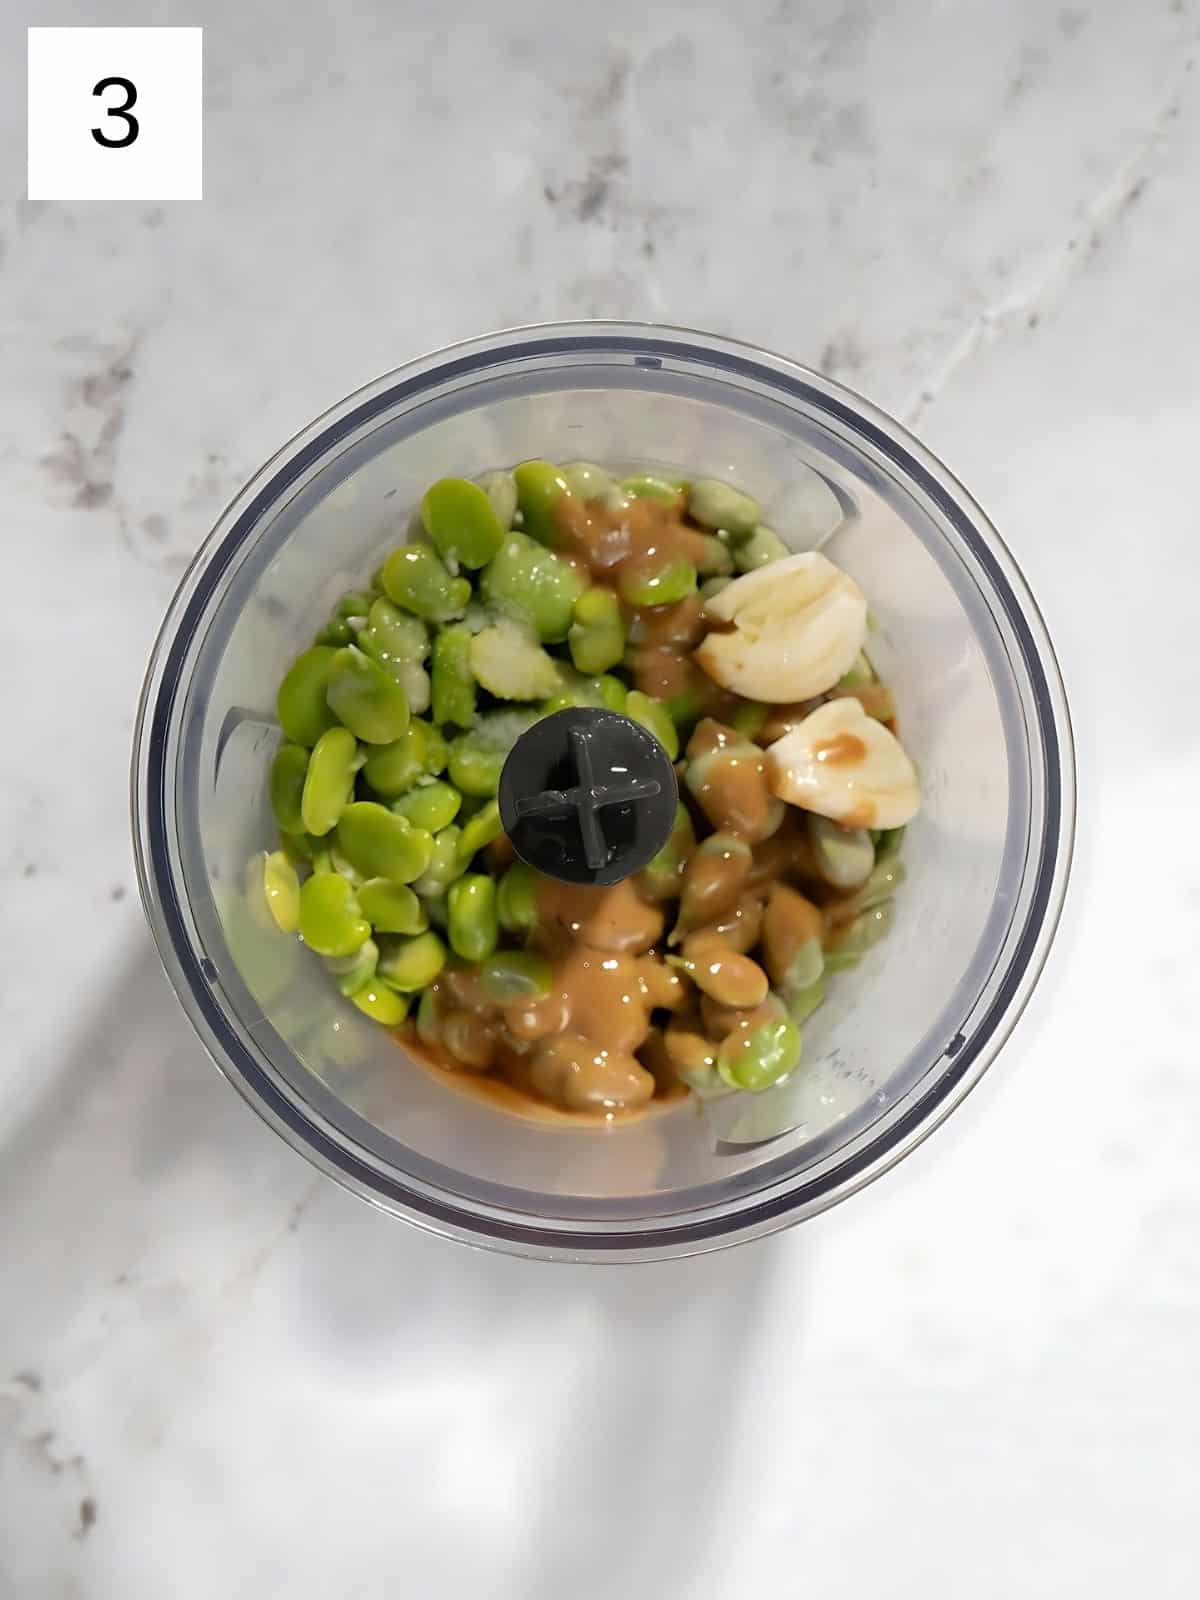 De-shelled and peeled fava beans with tahini and garlic cloves in a food processor.